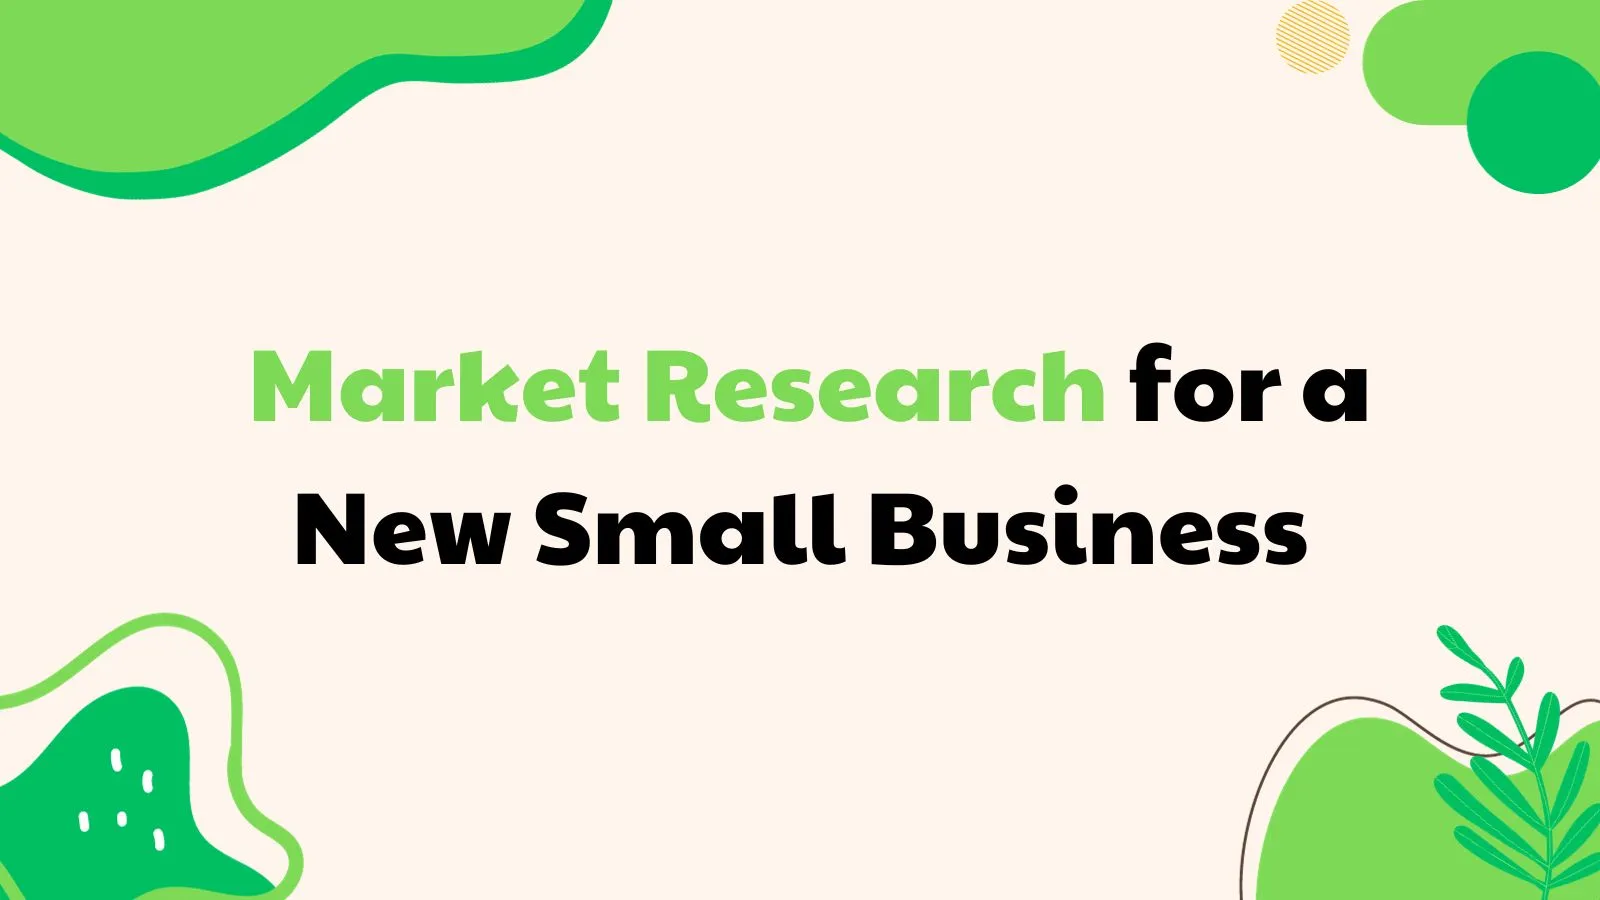 Market Research For a New Small Business